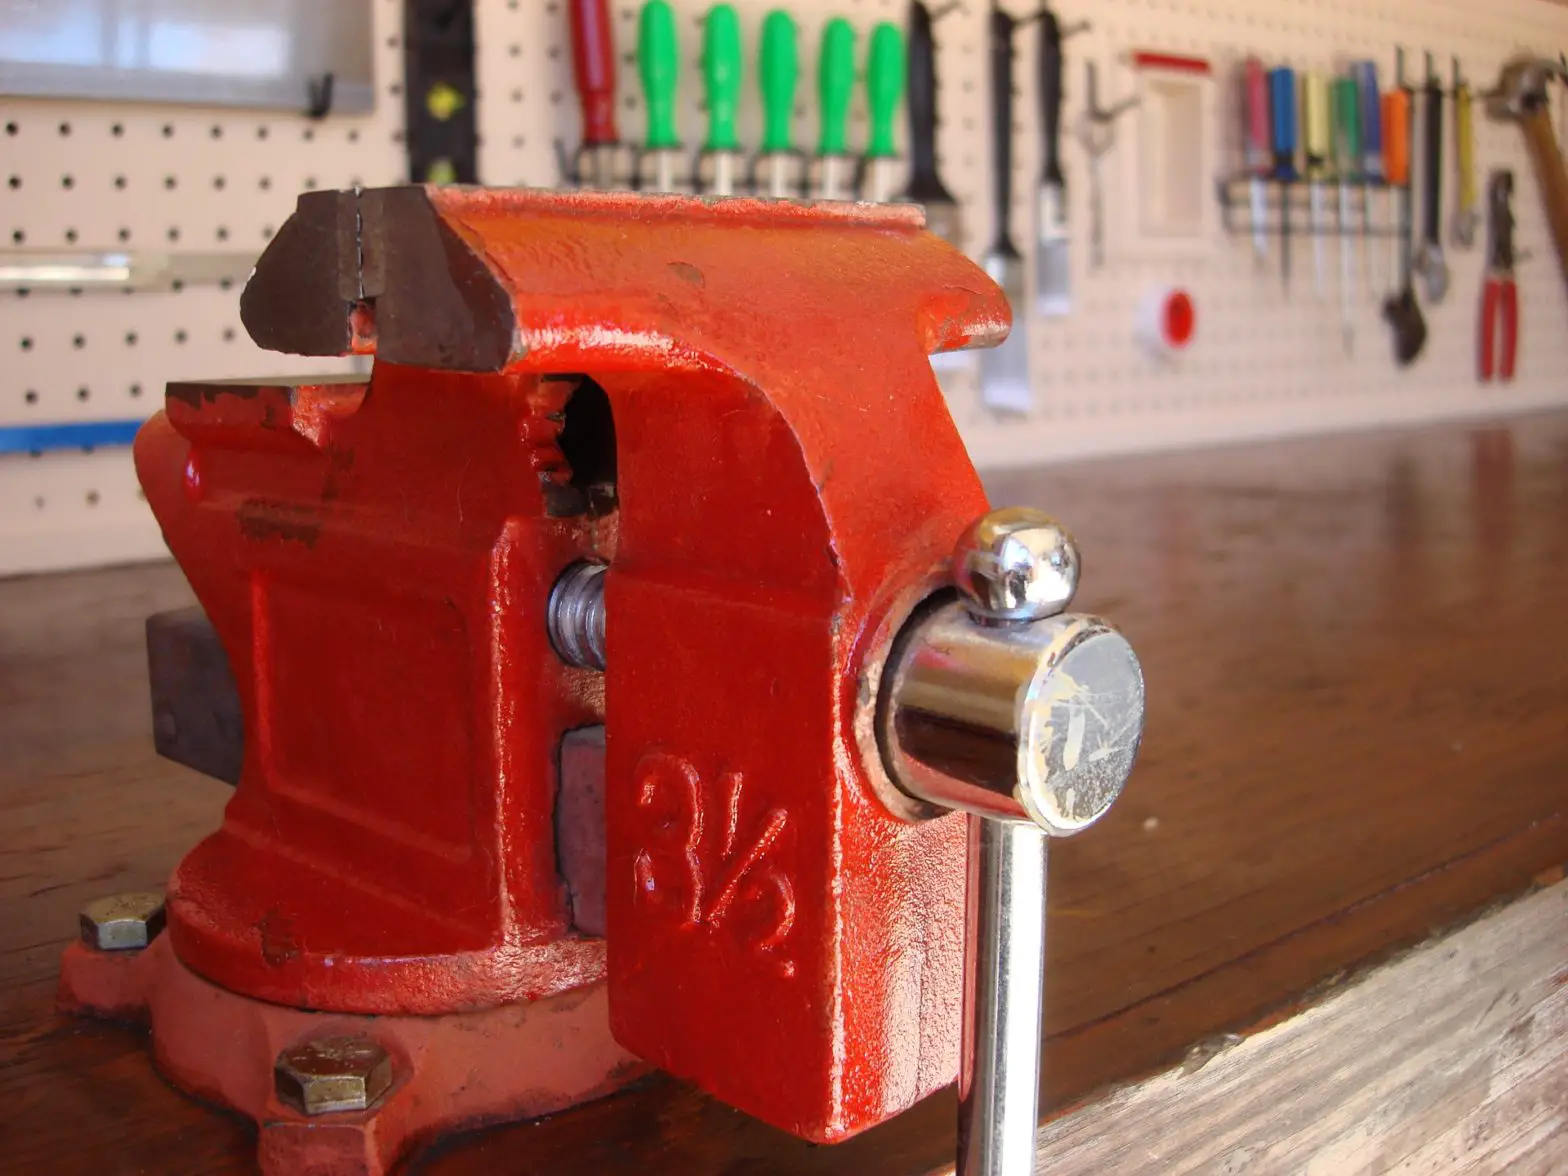 A vice grip attached to a workbench top